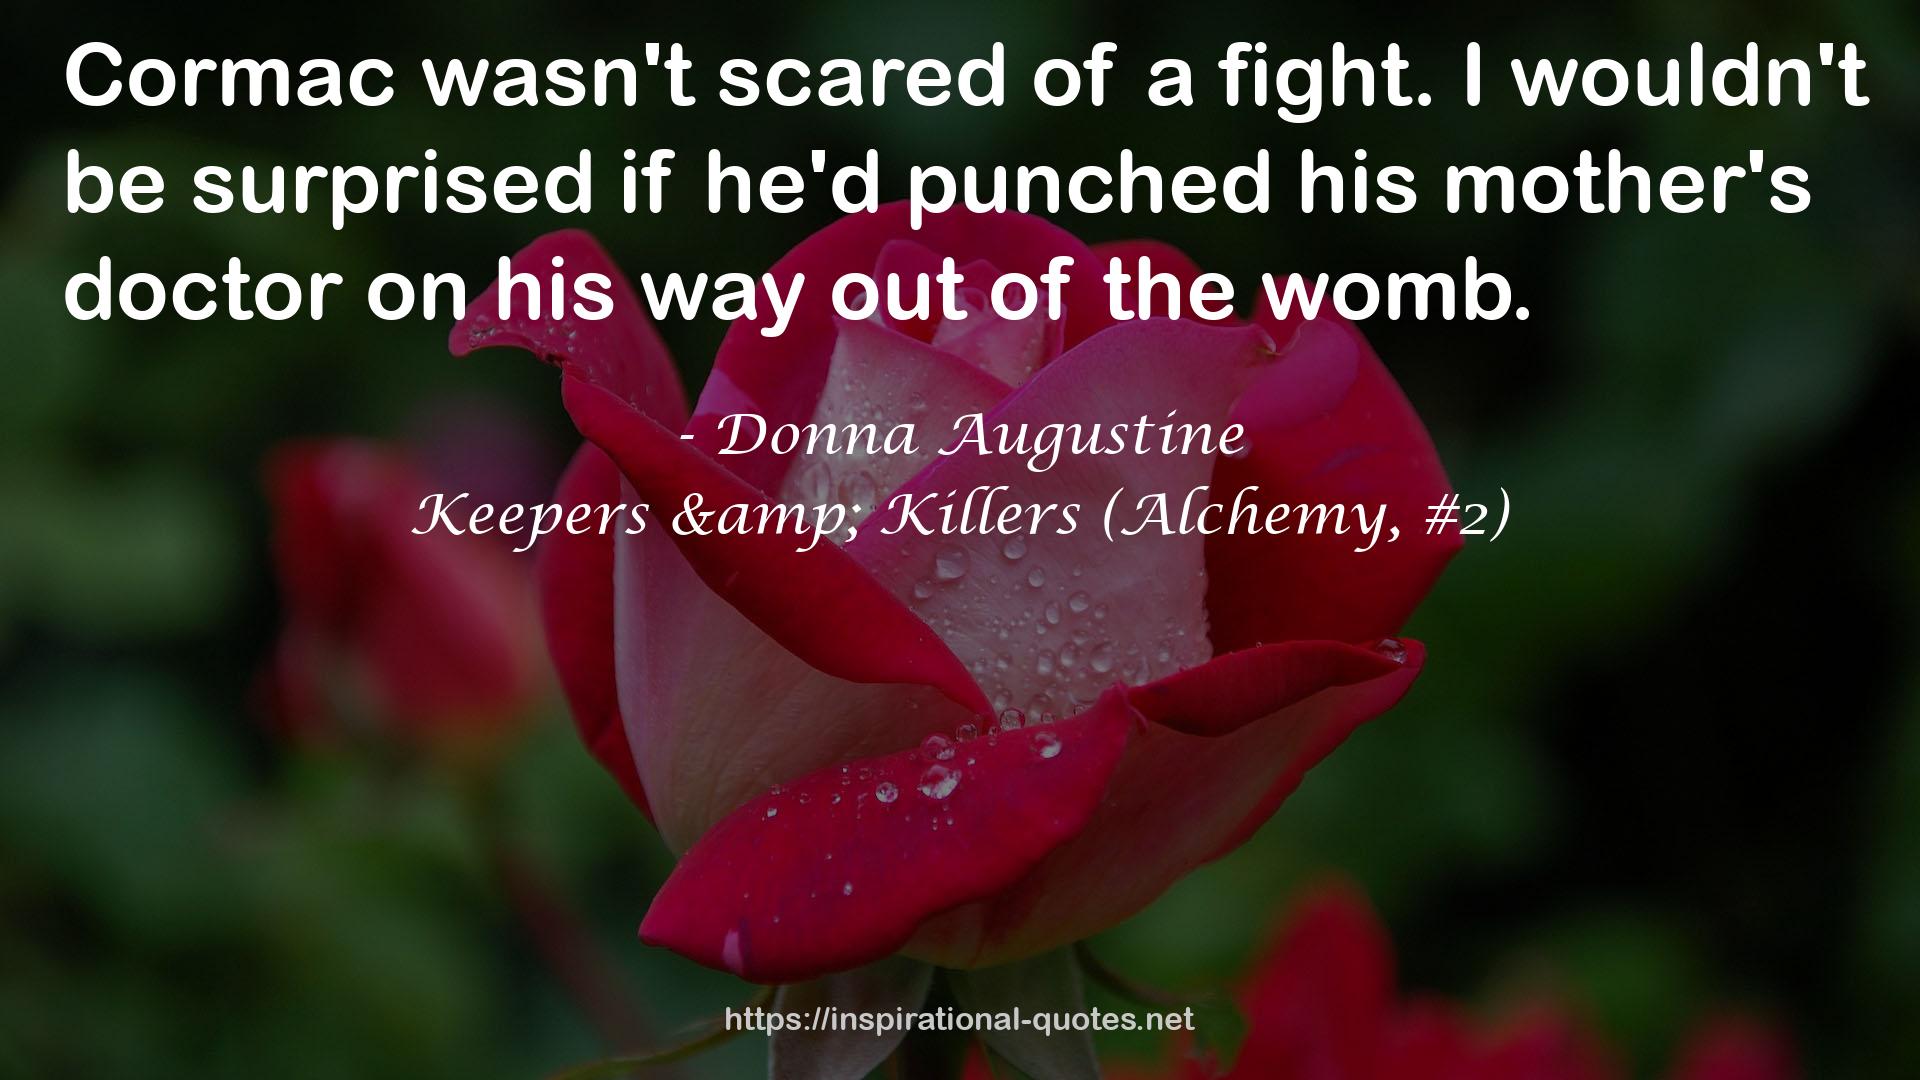 Keepers & Killers (Alchemy, #2) QUOTES